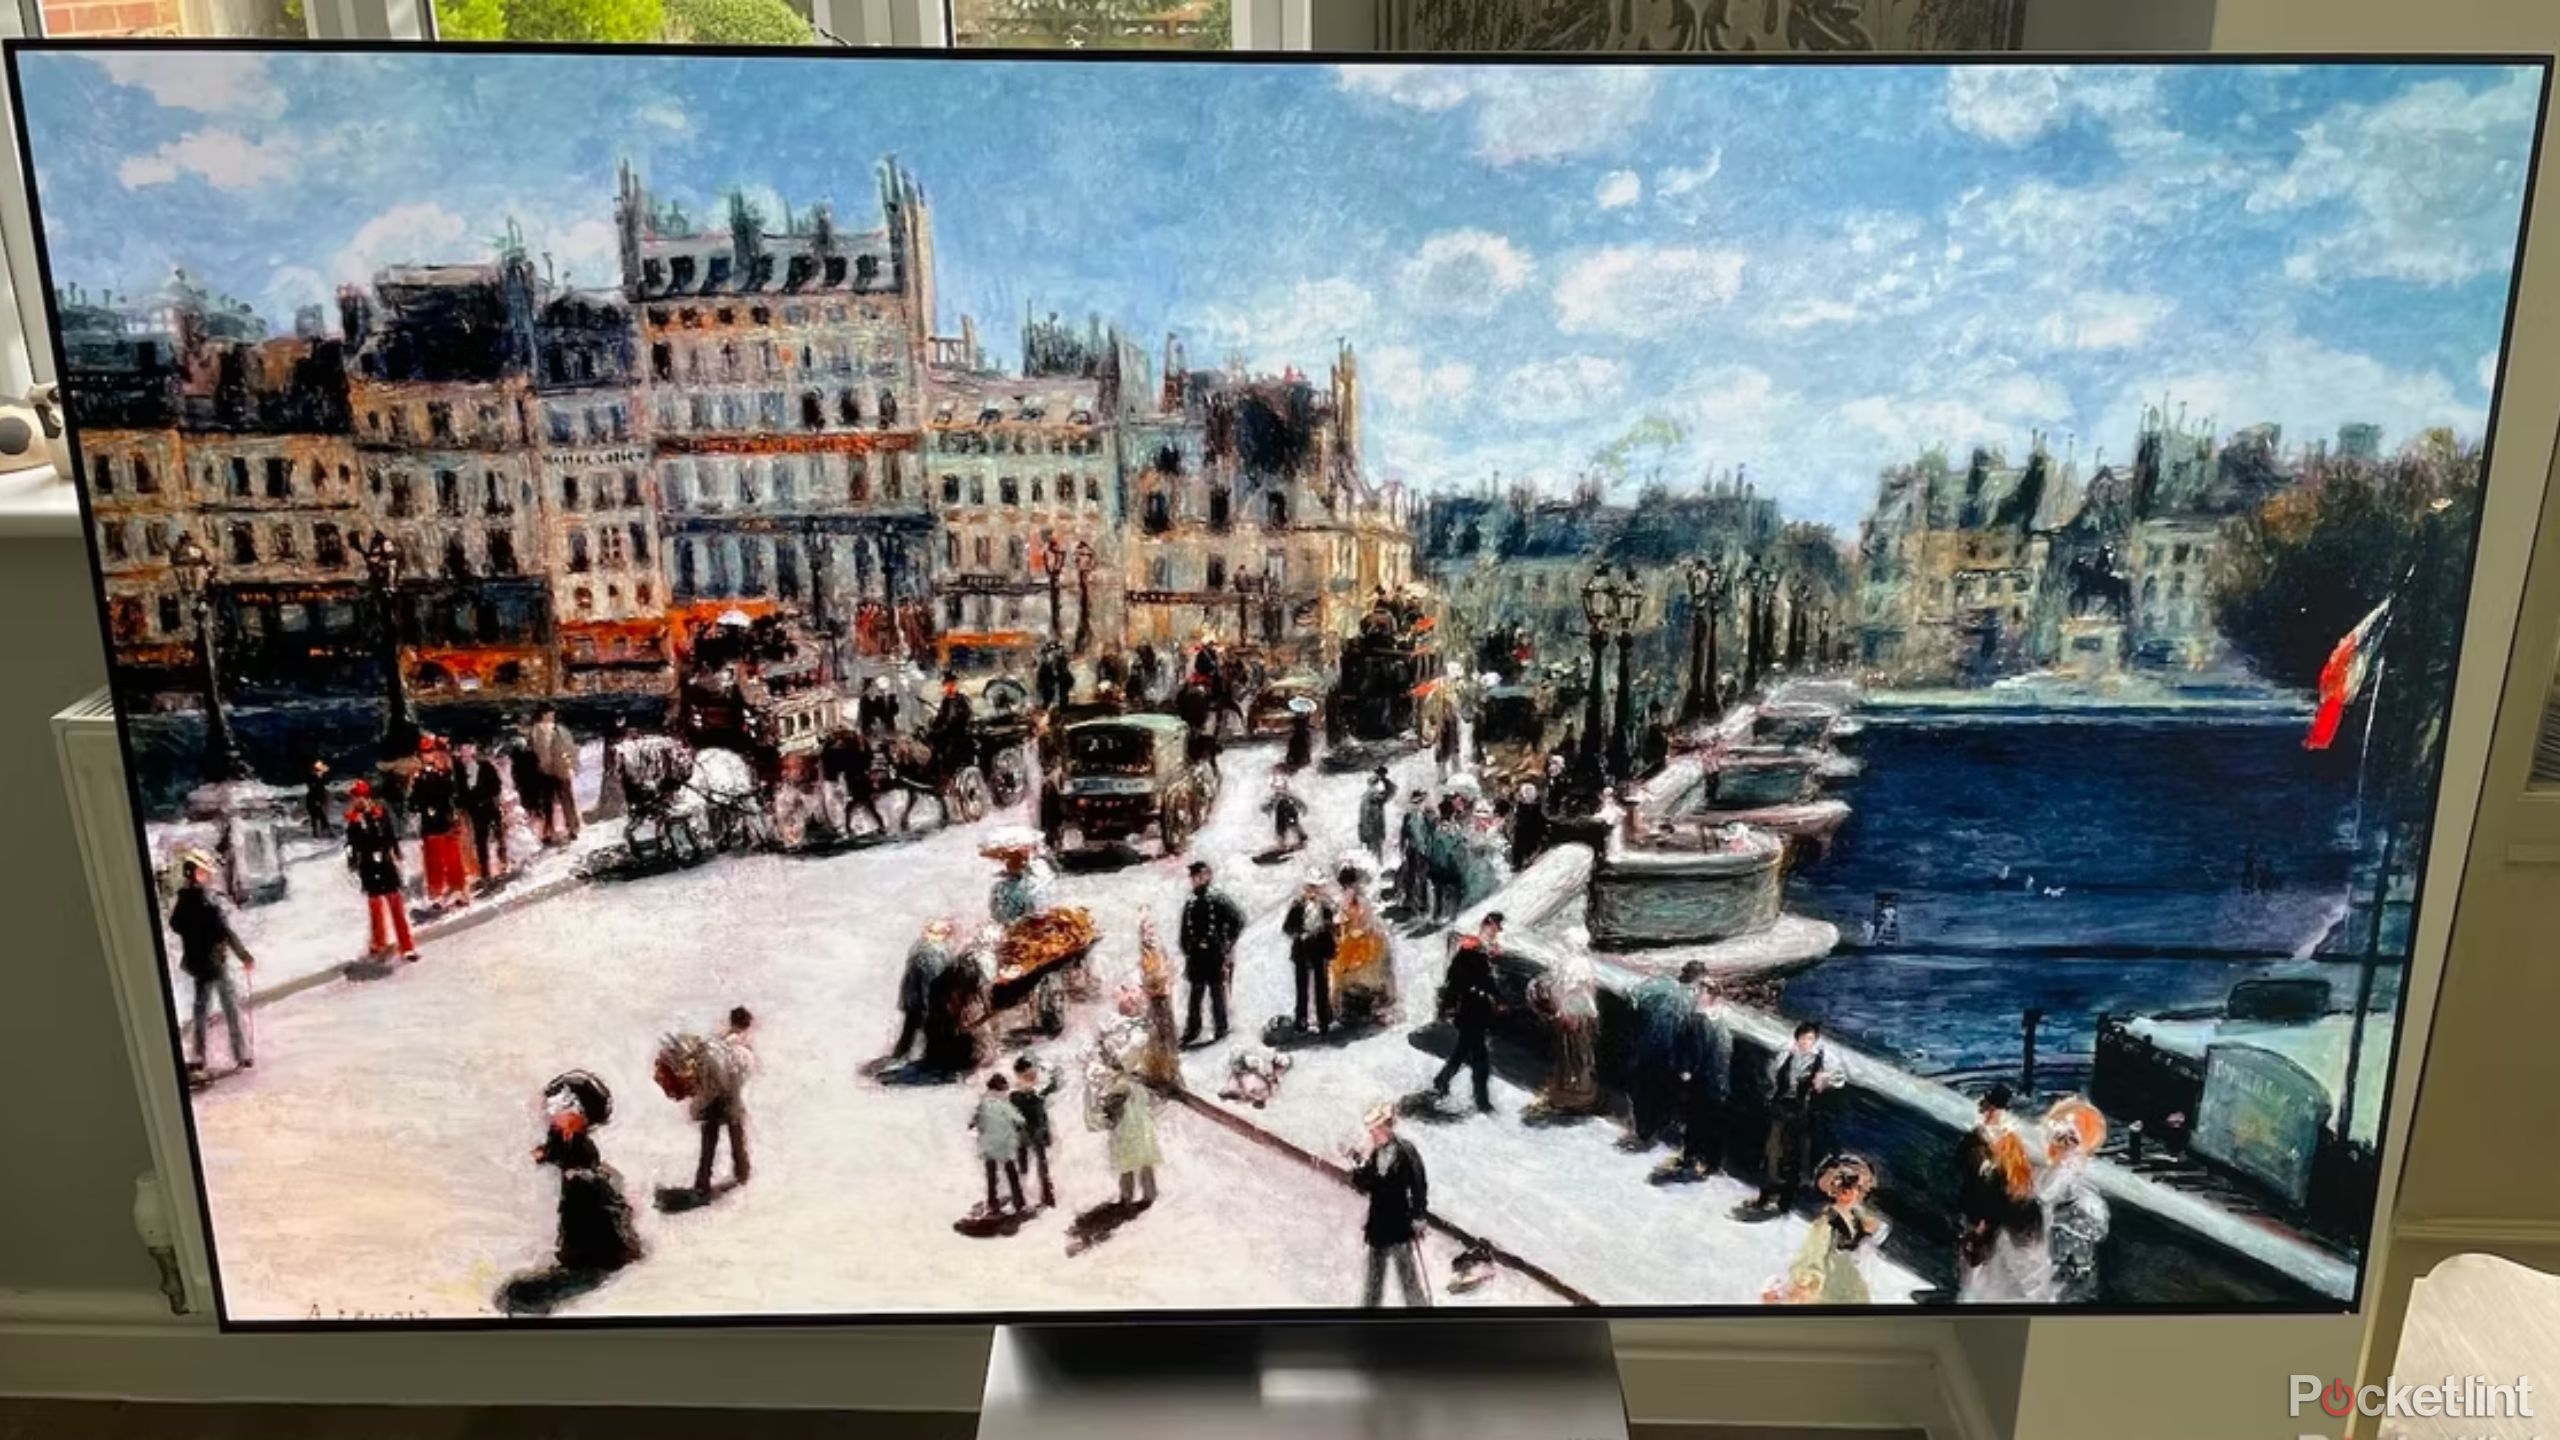 LG G3 OLED TV displaying a rendering of a pastel painting. 